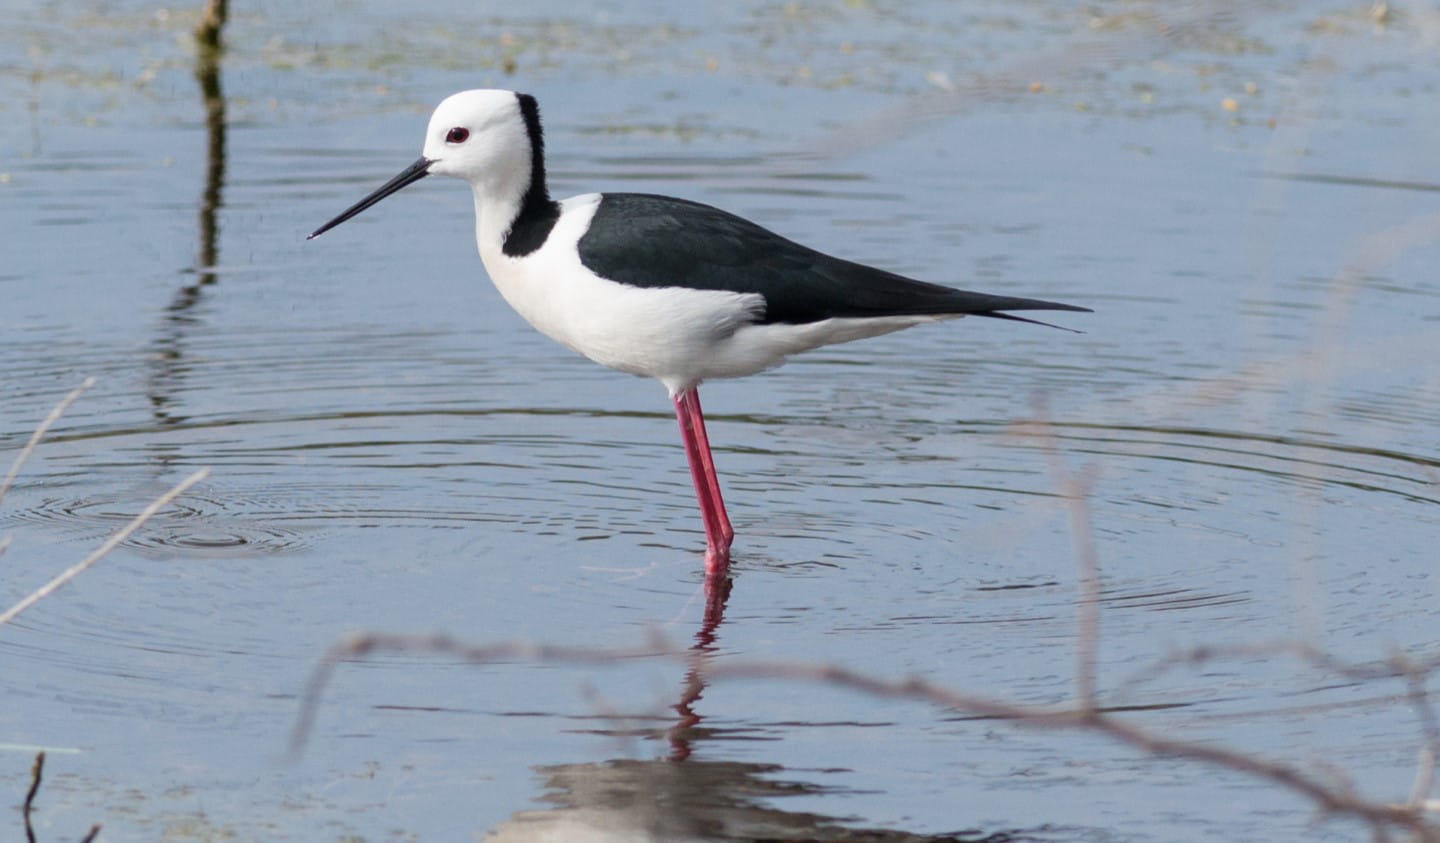 Westgate Park is home to many birds, including Black-Winged Stilts.